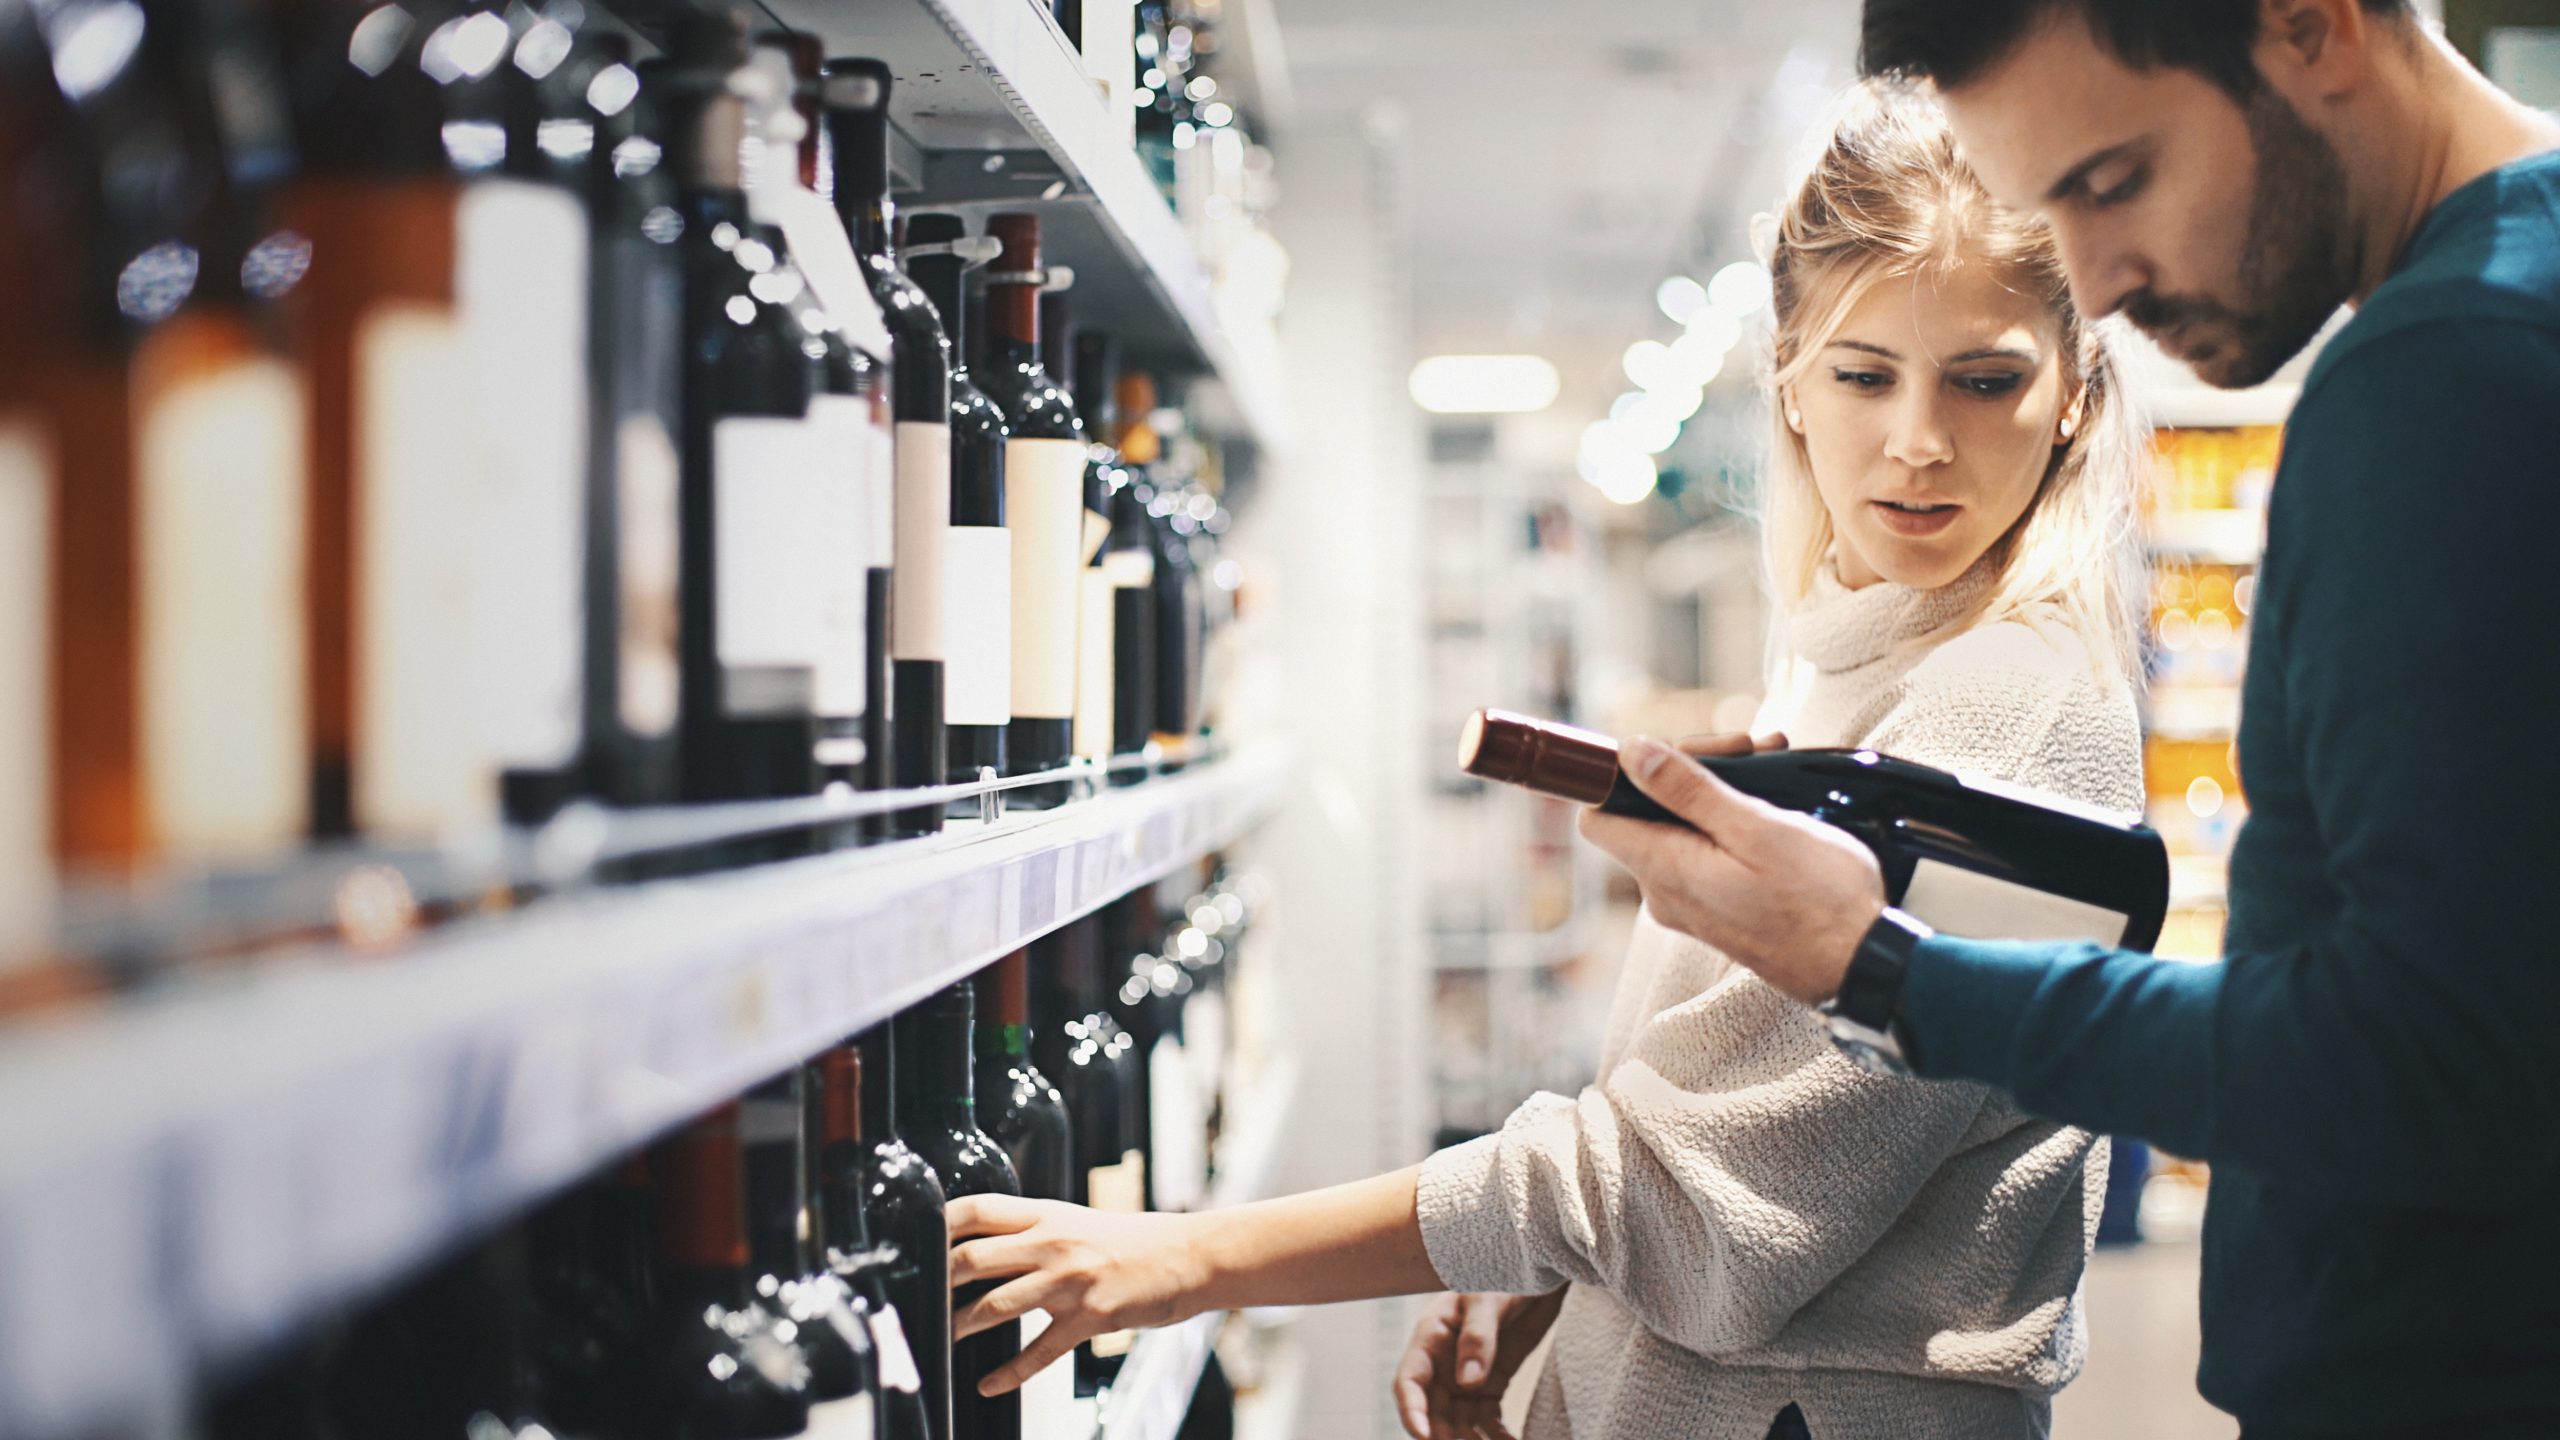 Couple buying some wine at a supermarket: Port brand Sogrape joins experimental electronic labelling project